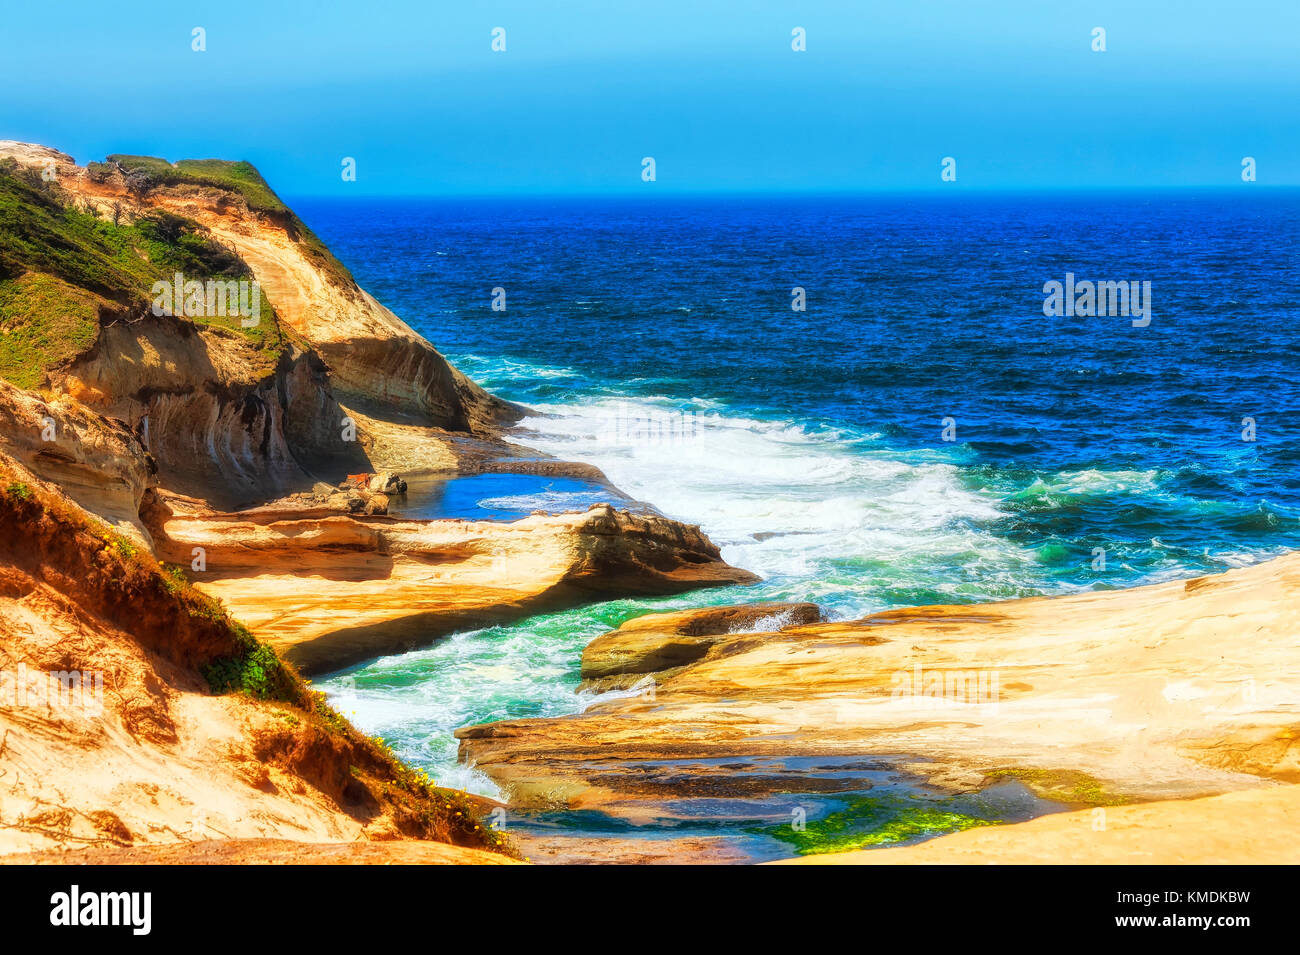 View from on top of sandstone cliffs looking down at the shoreline at Cape Kiwanda at Pacific City, on the Oregon Coast. Stock Photo